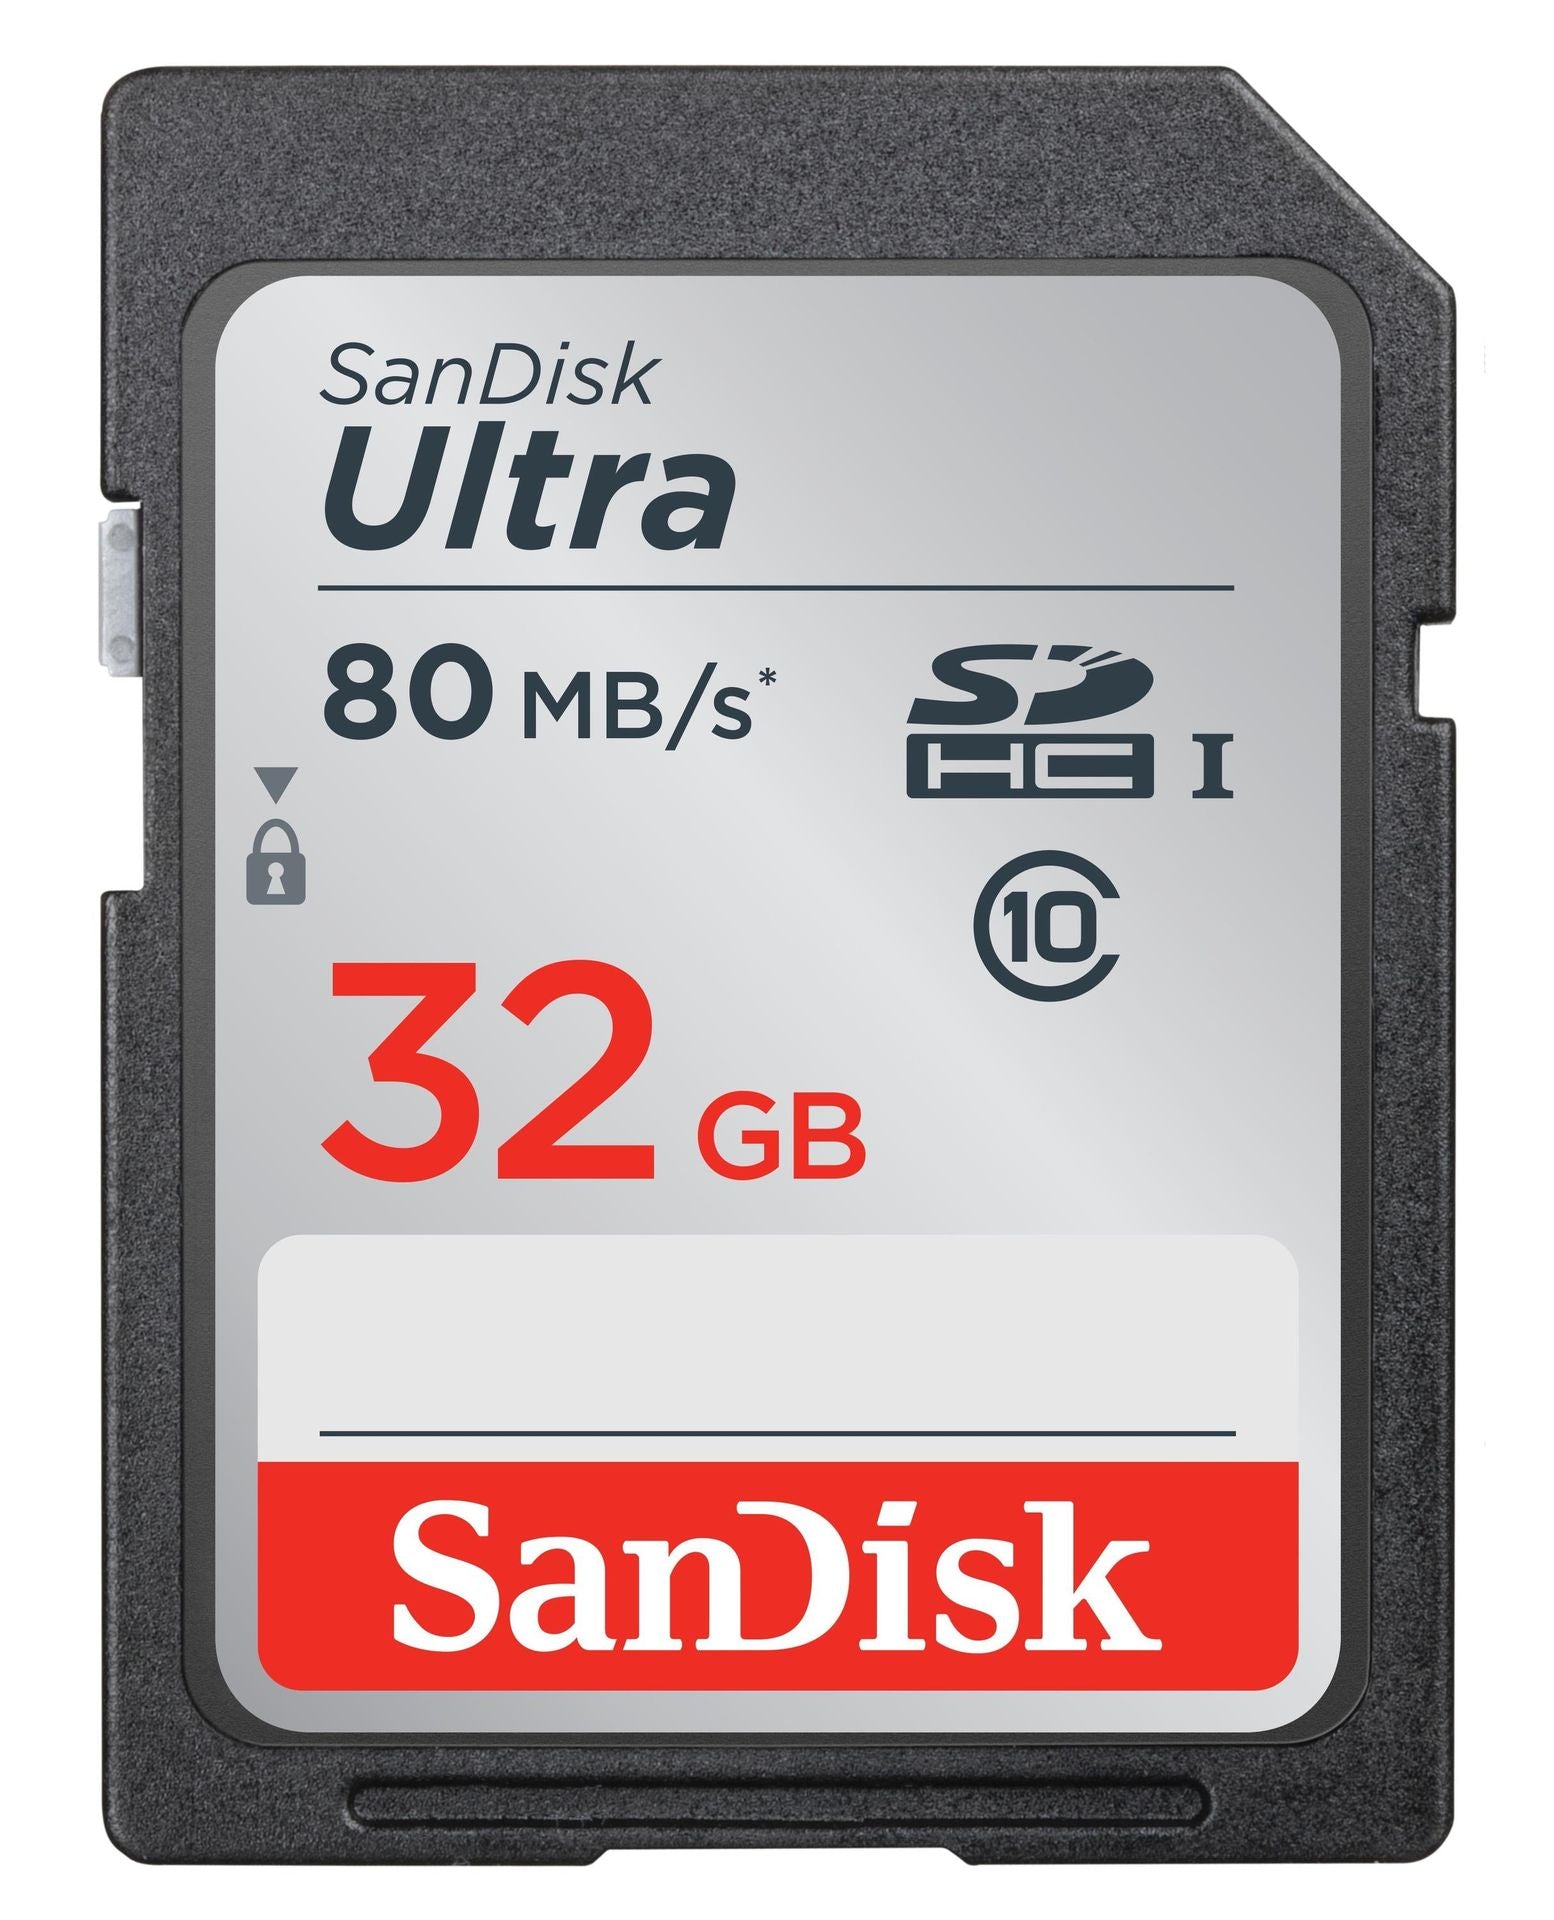 Sandisk Ultra memory card 32 GB SDHC Class 10 UHS-I